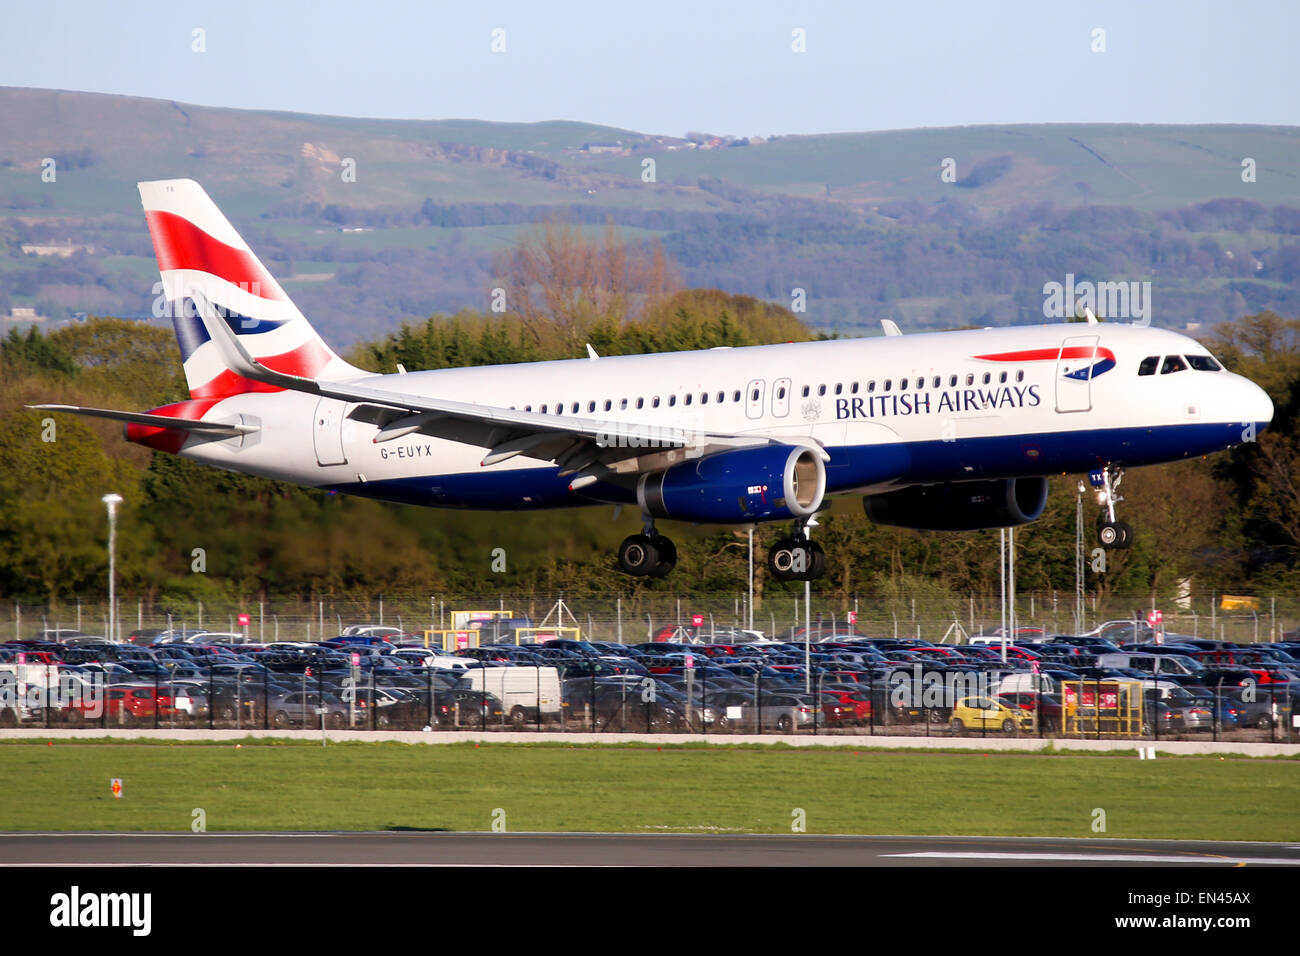 British Airways Airbus A320 approaches runway 23R at Manchester airport. Stock Photo